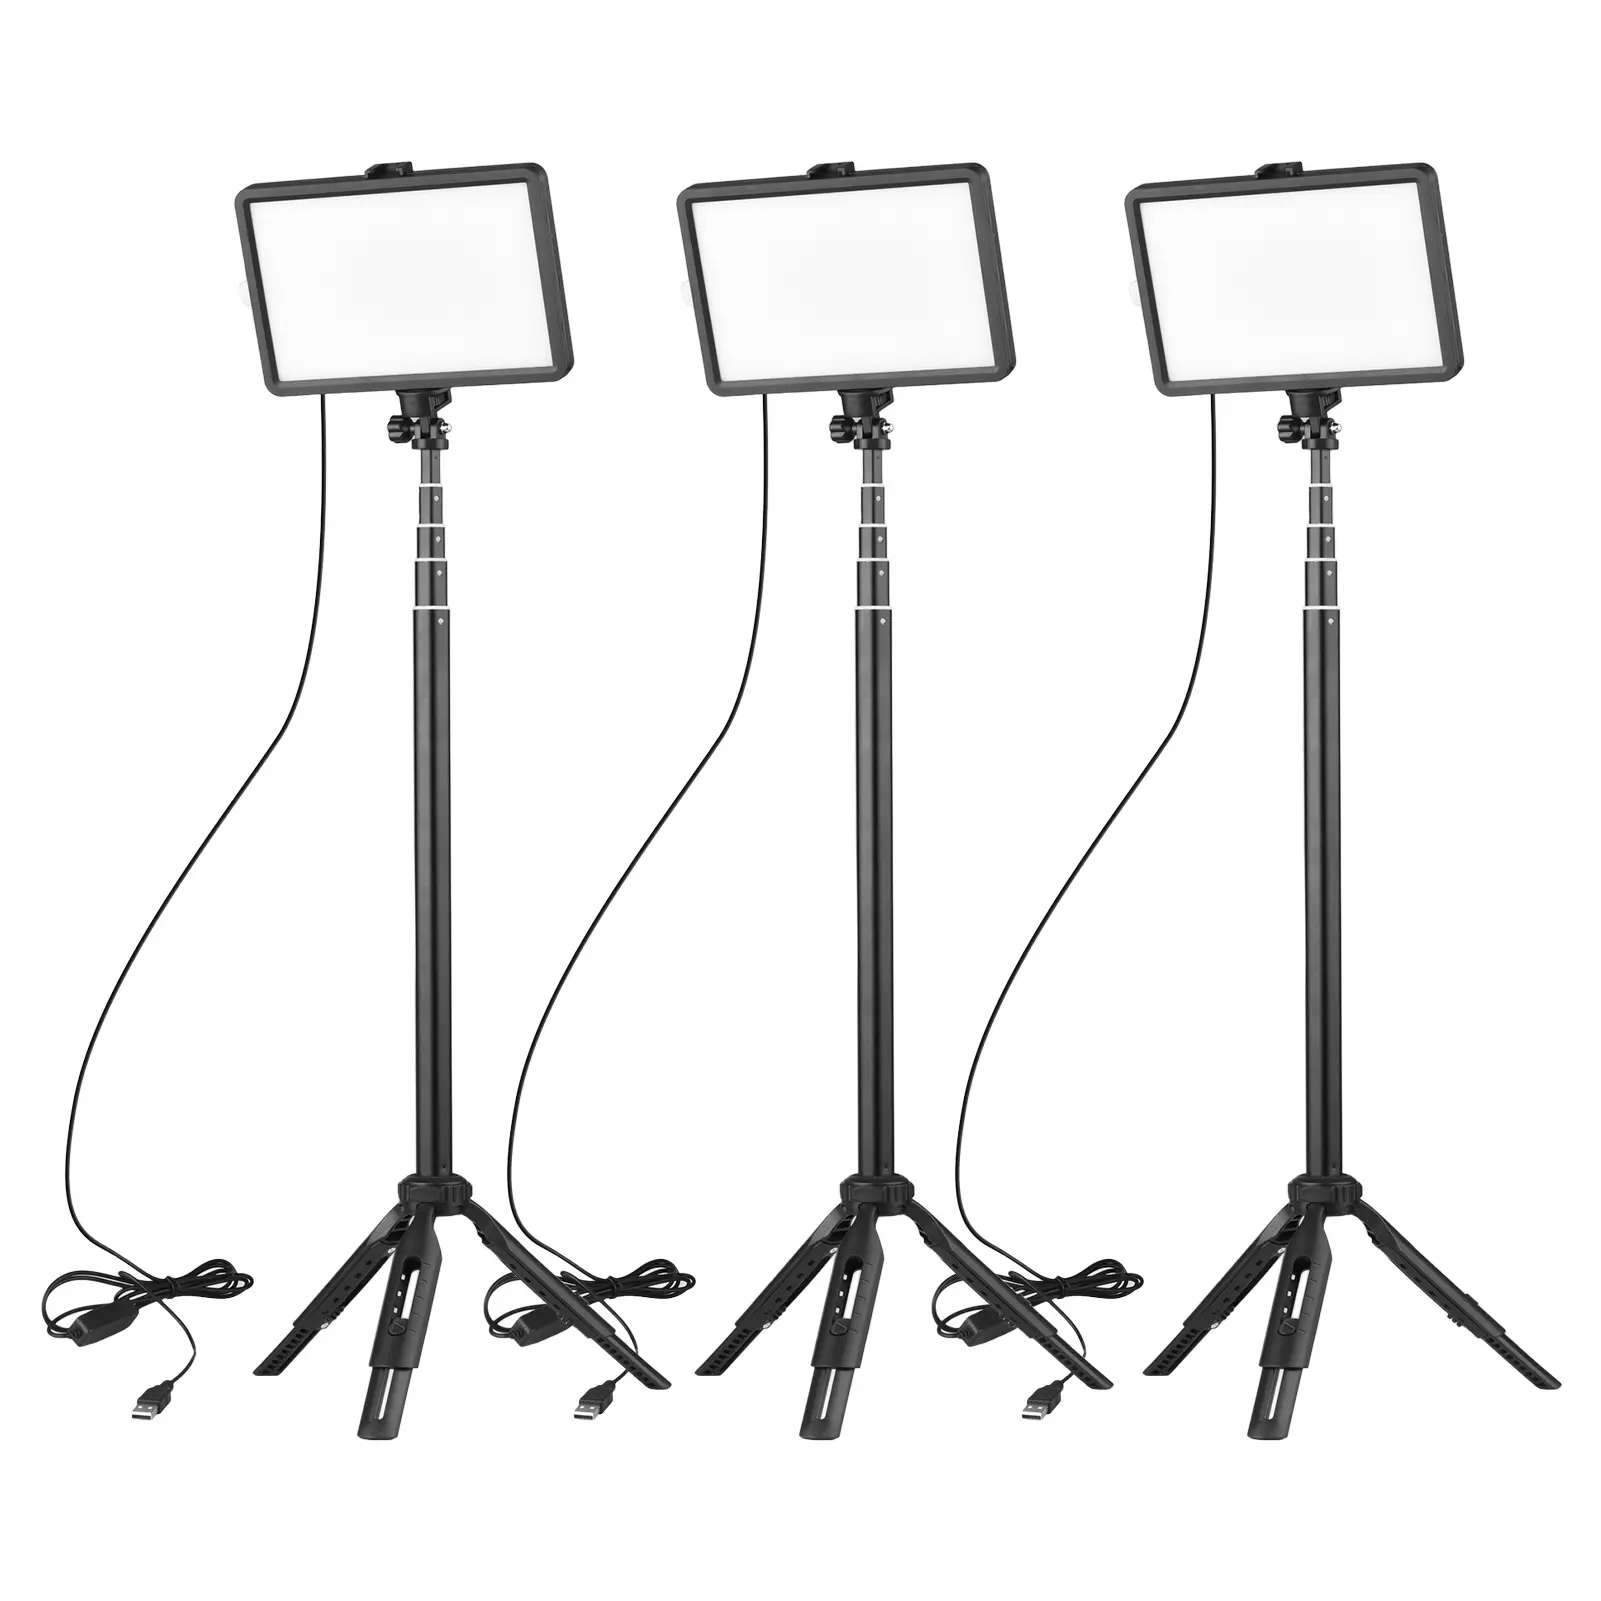 New Upgraded USB Led Photography Video Studio Light Kit for Live Streaming Video Recording Online Meeting Teaching